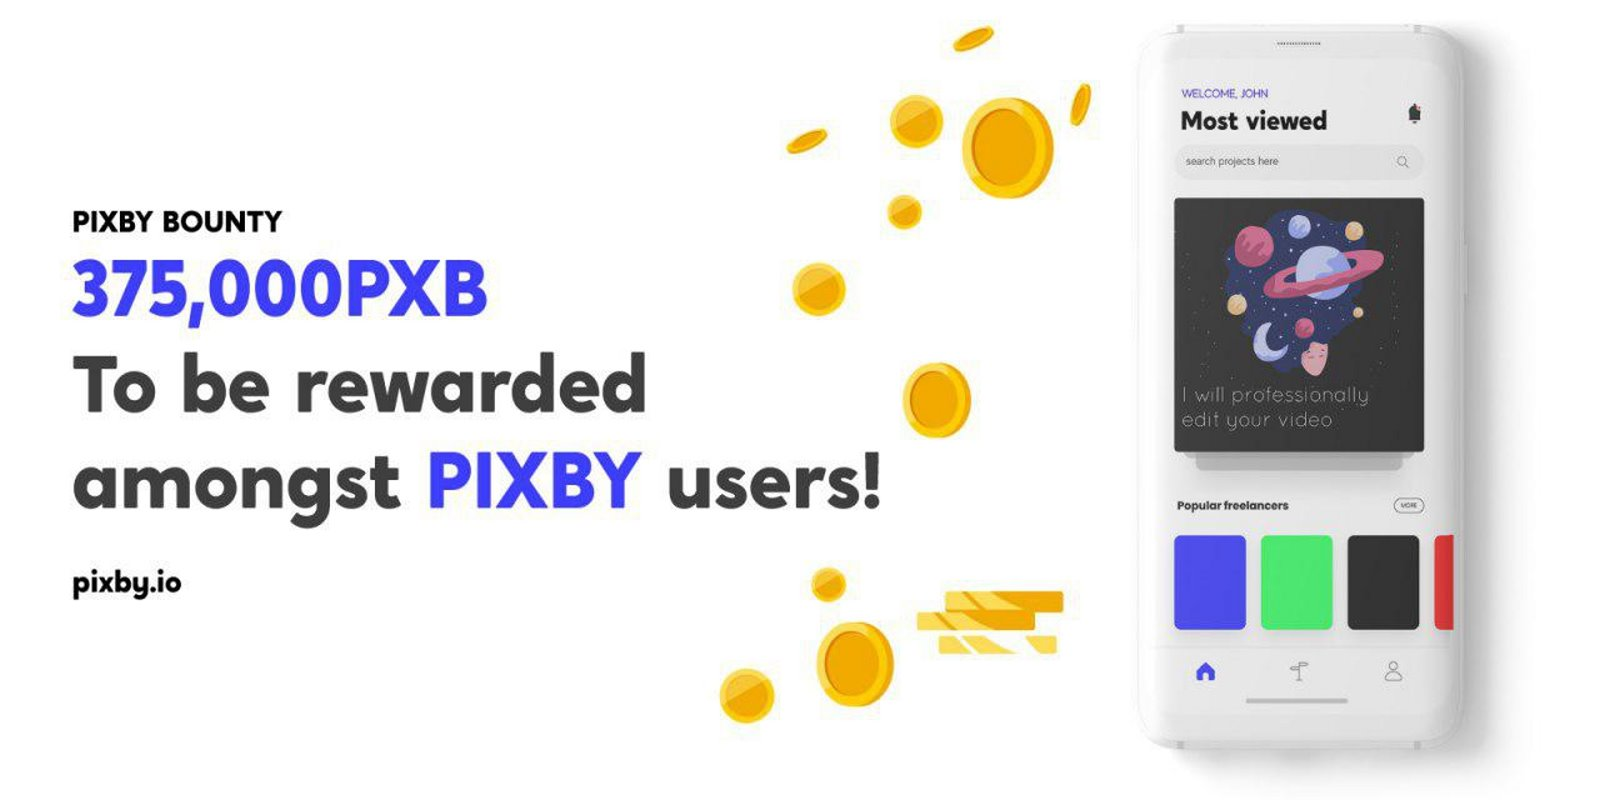 About PIXBY [PXB]